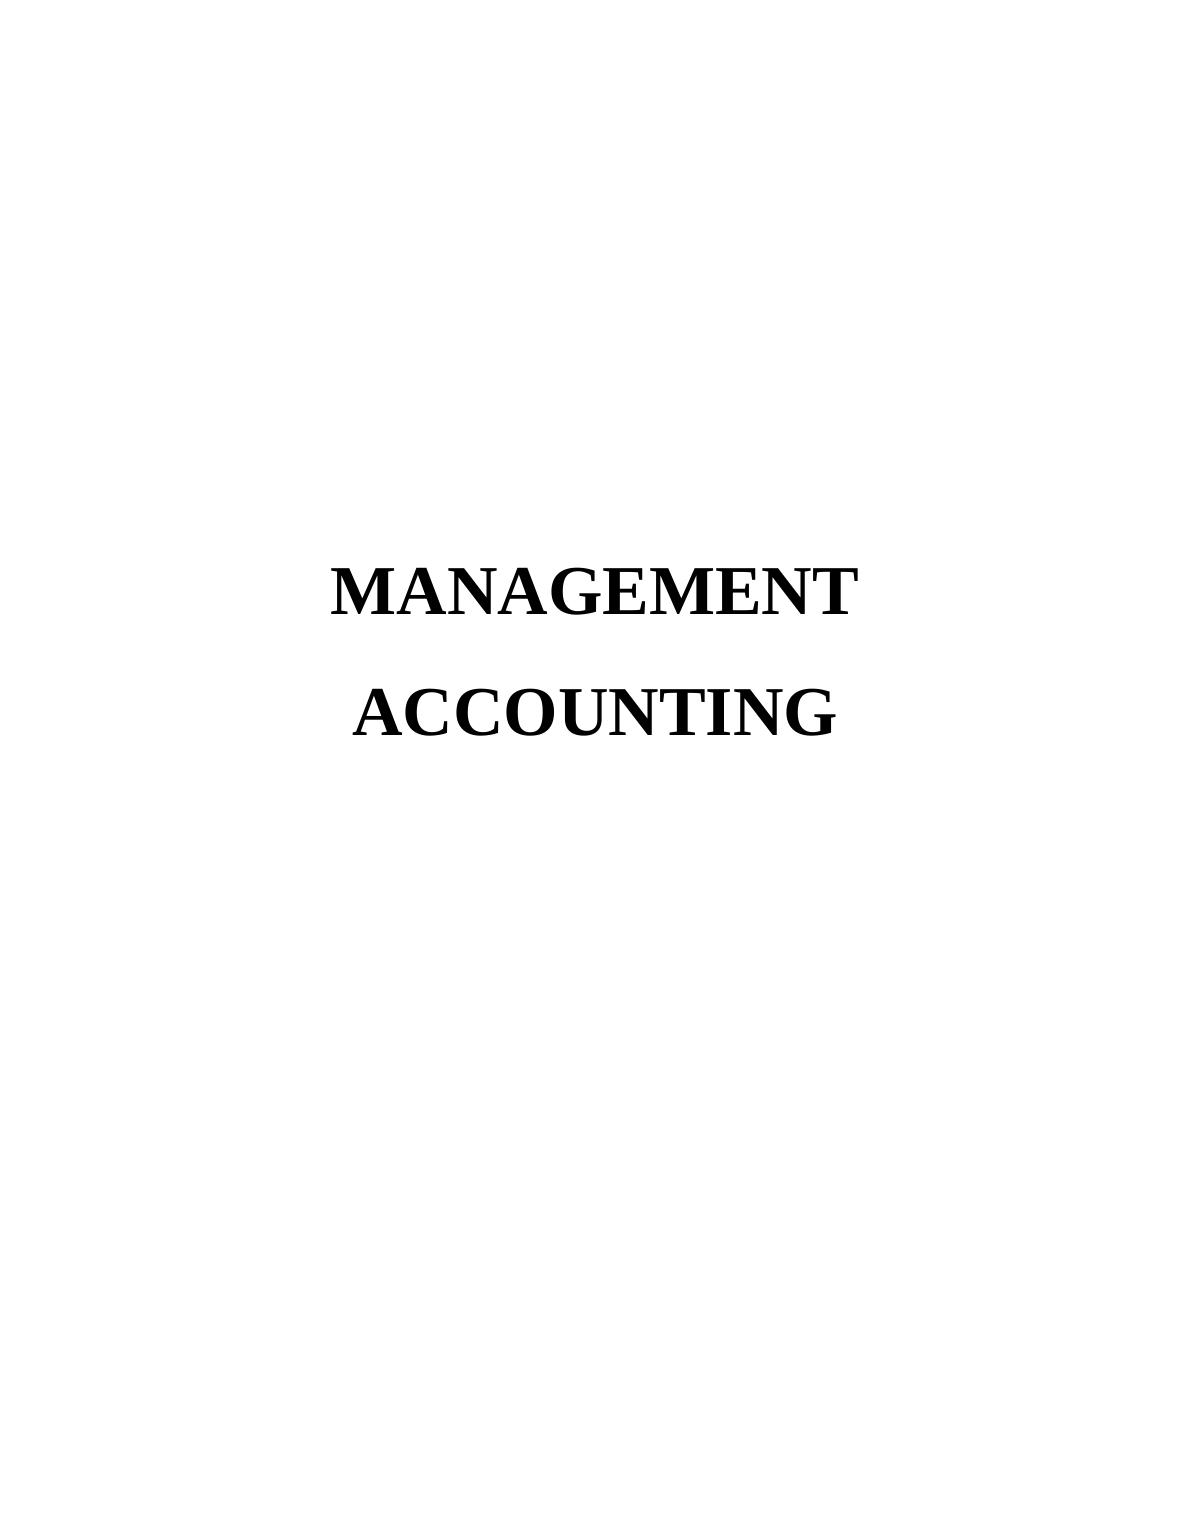 Management Accounting Assignment - Report_1